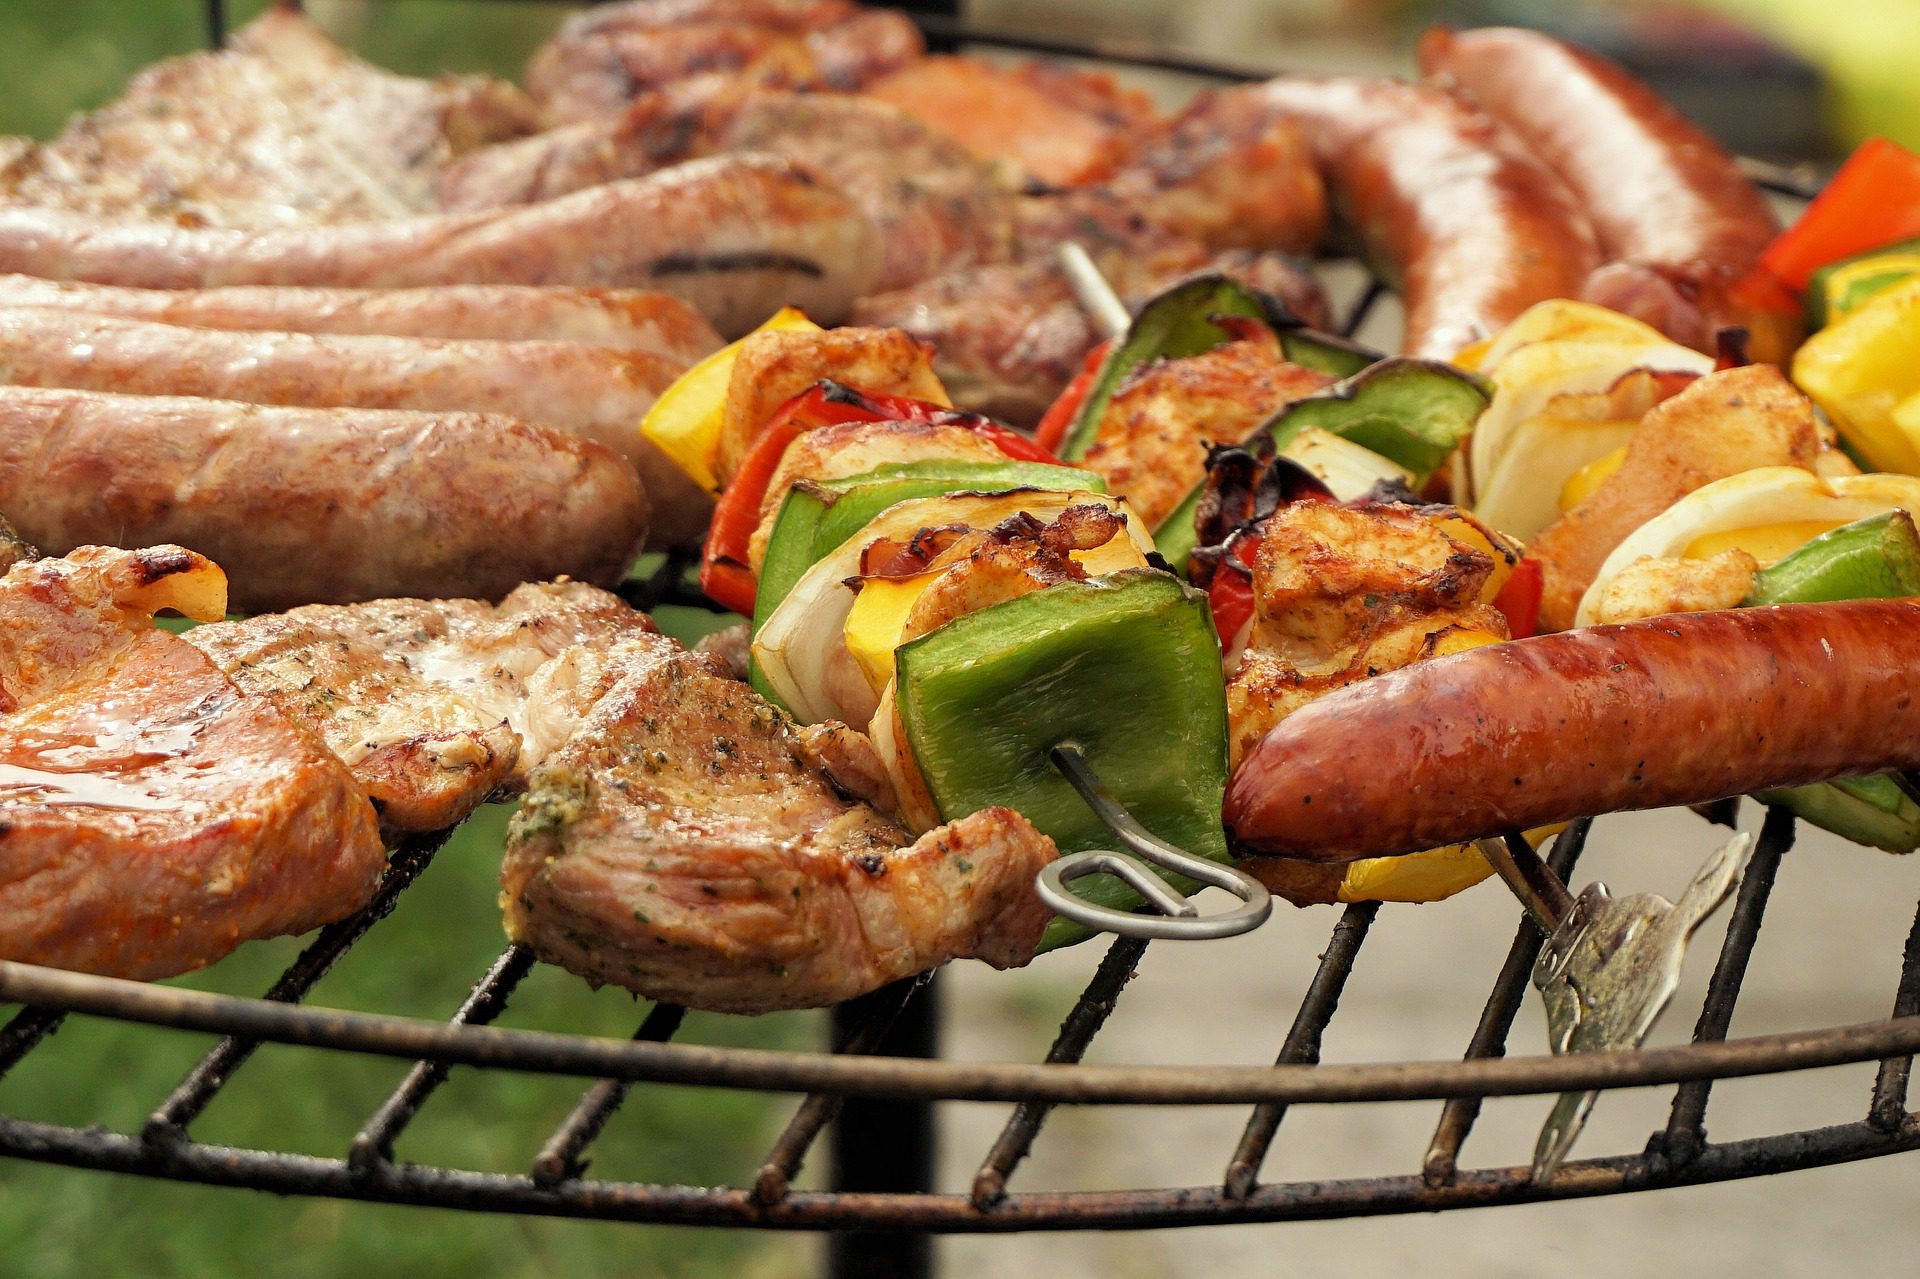 Barbecue food waste recycling